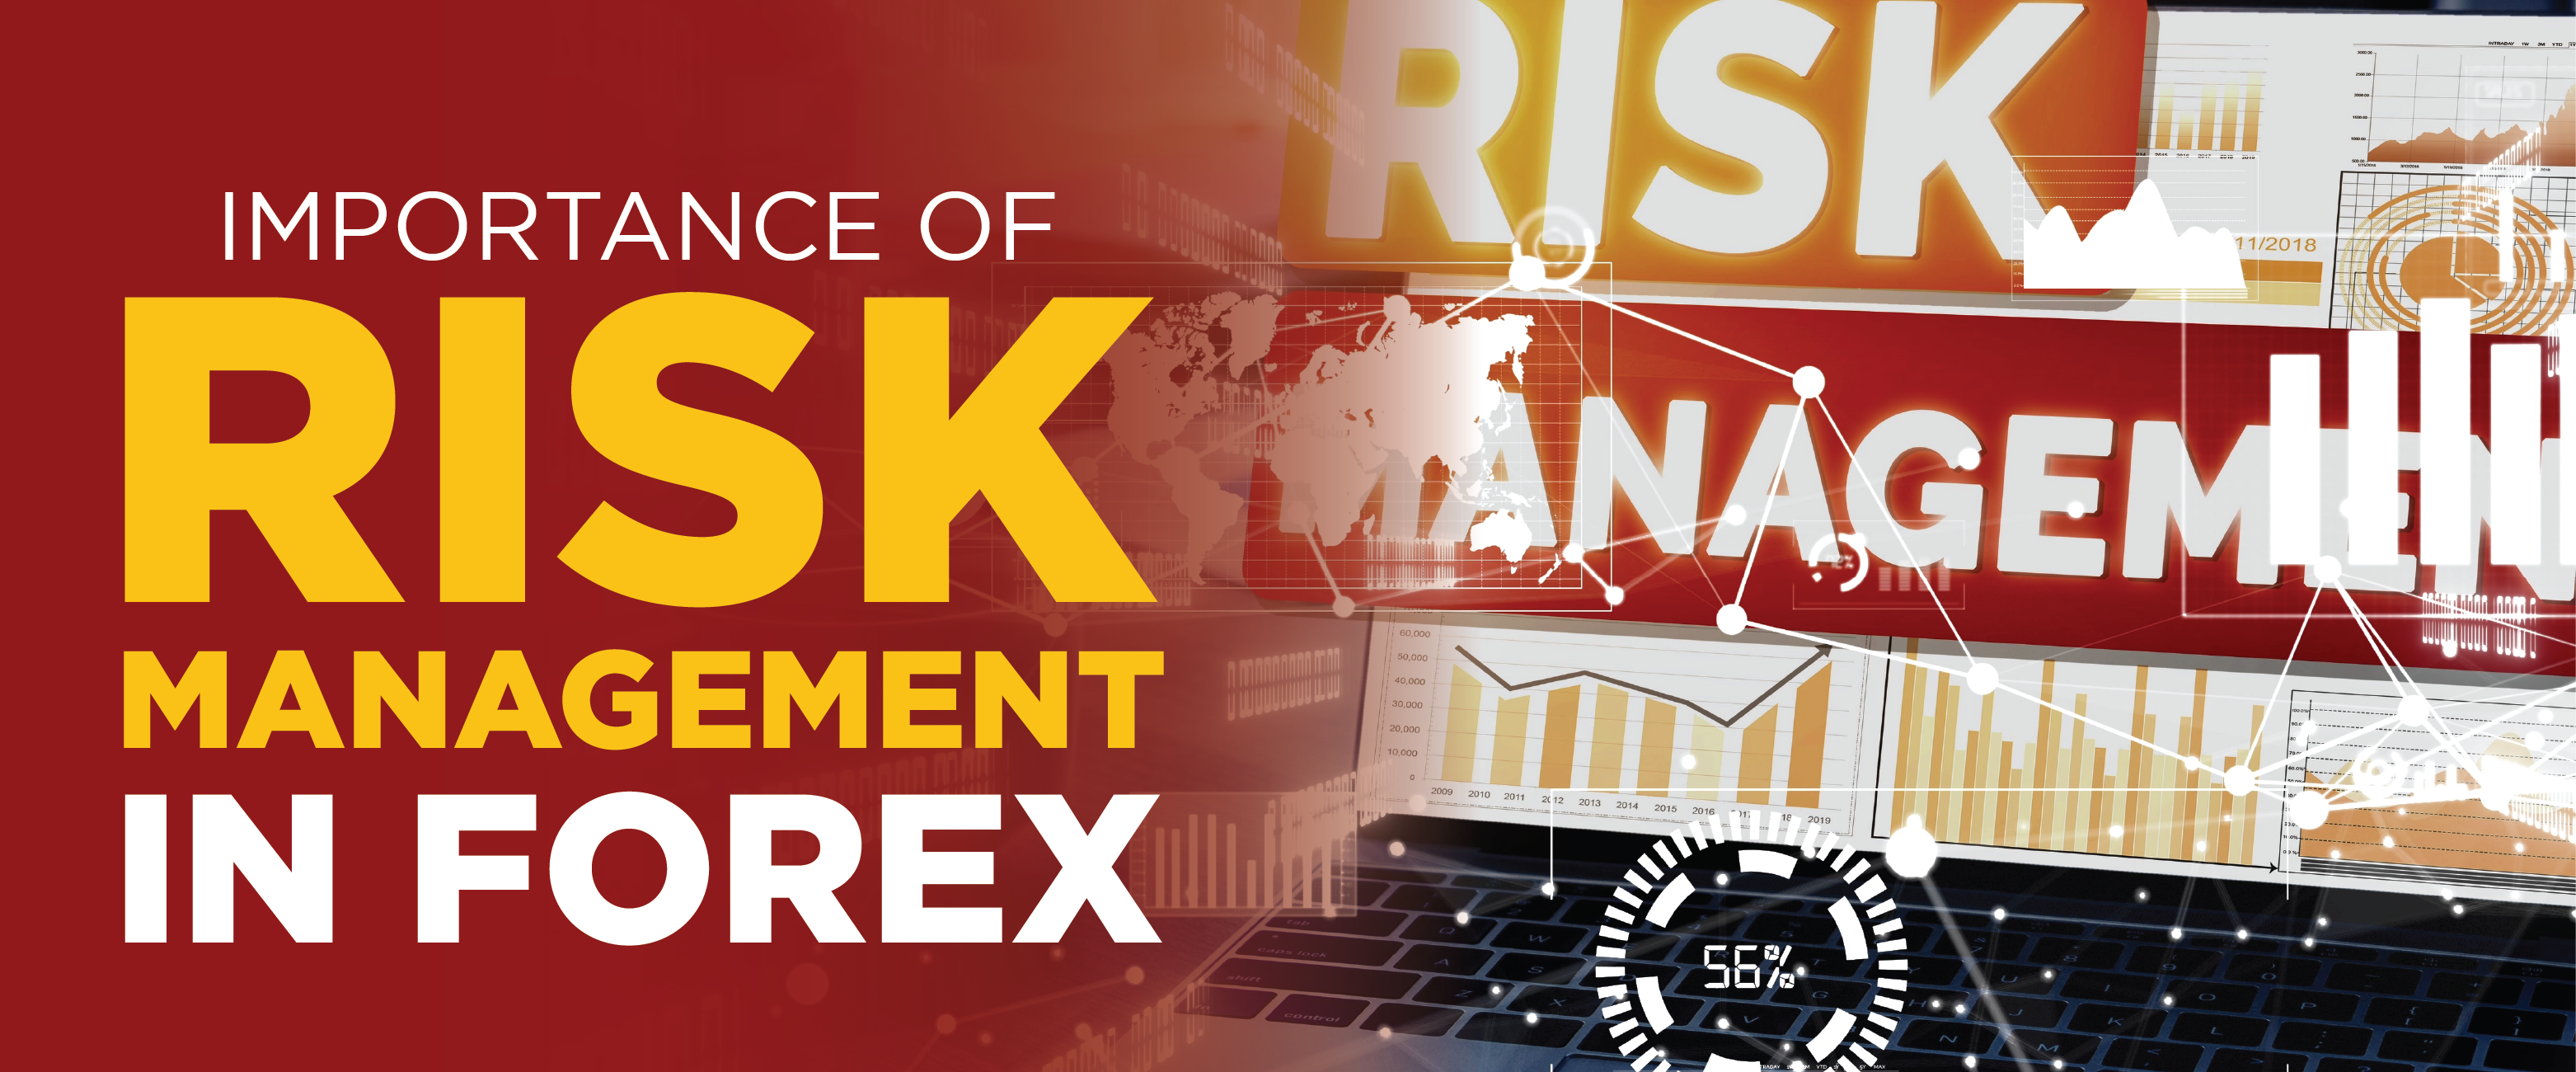 Importance of Risk Management in Forex